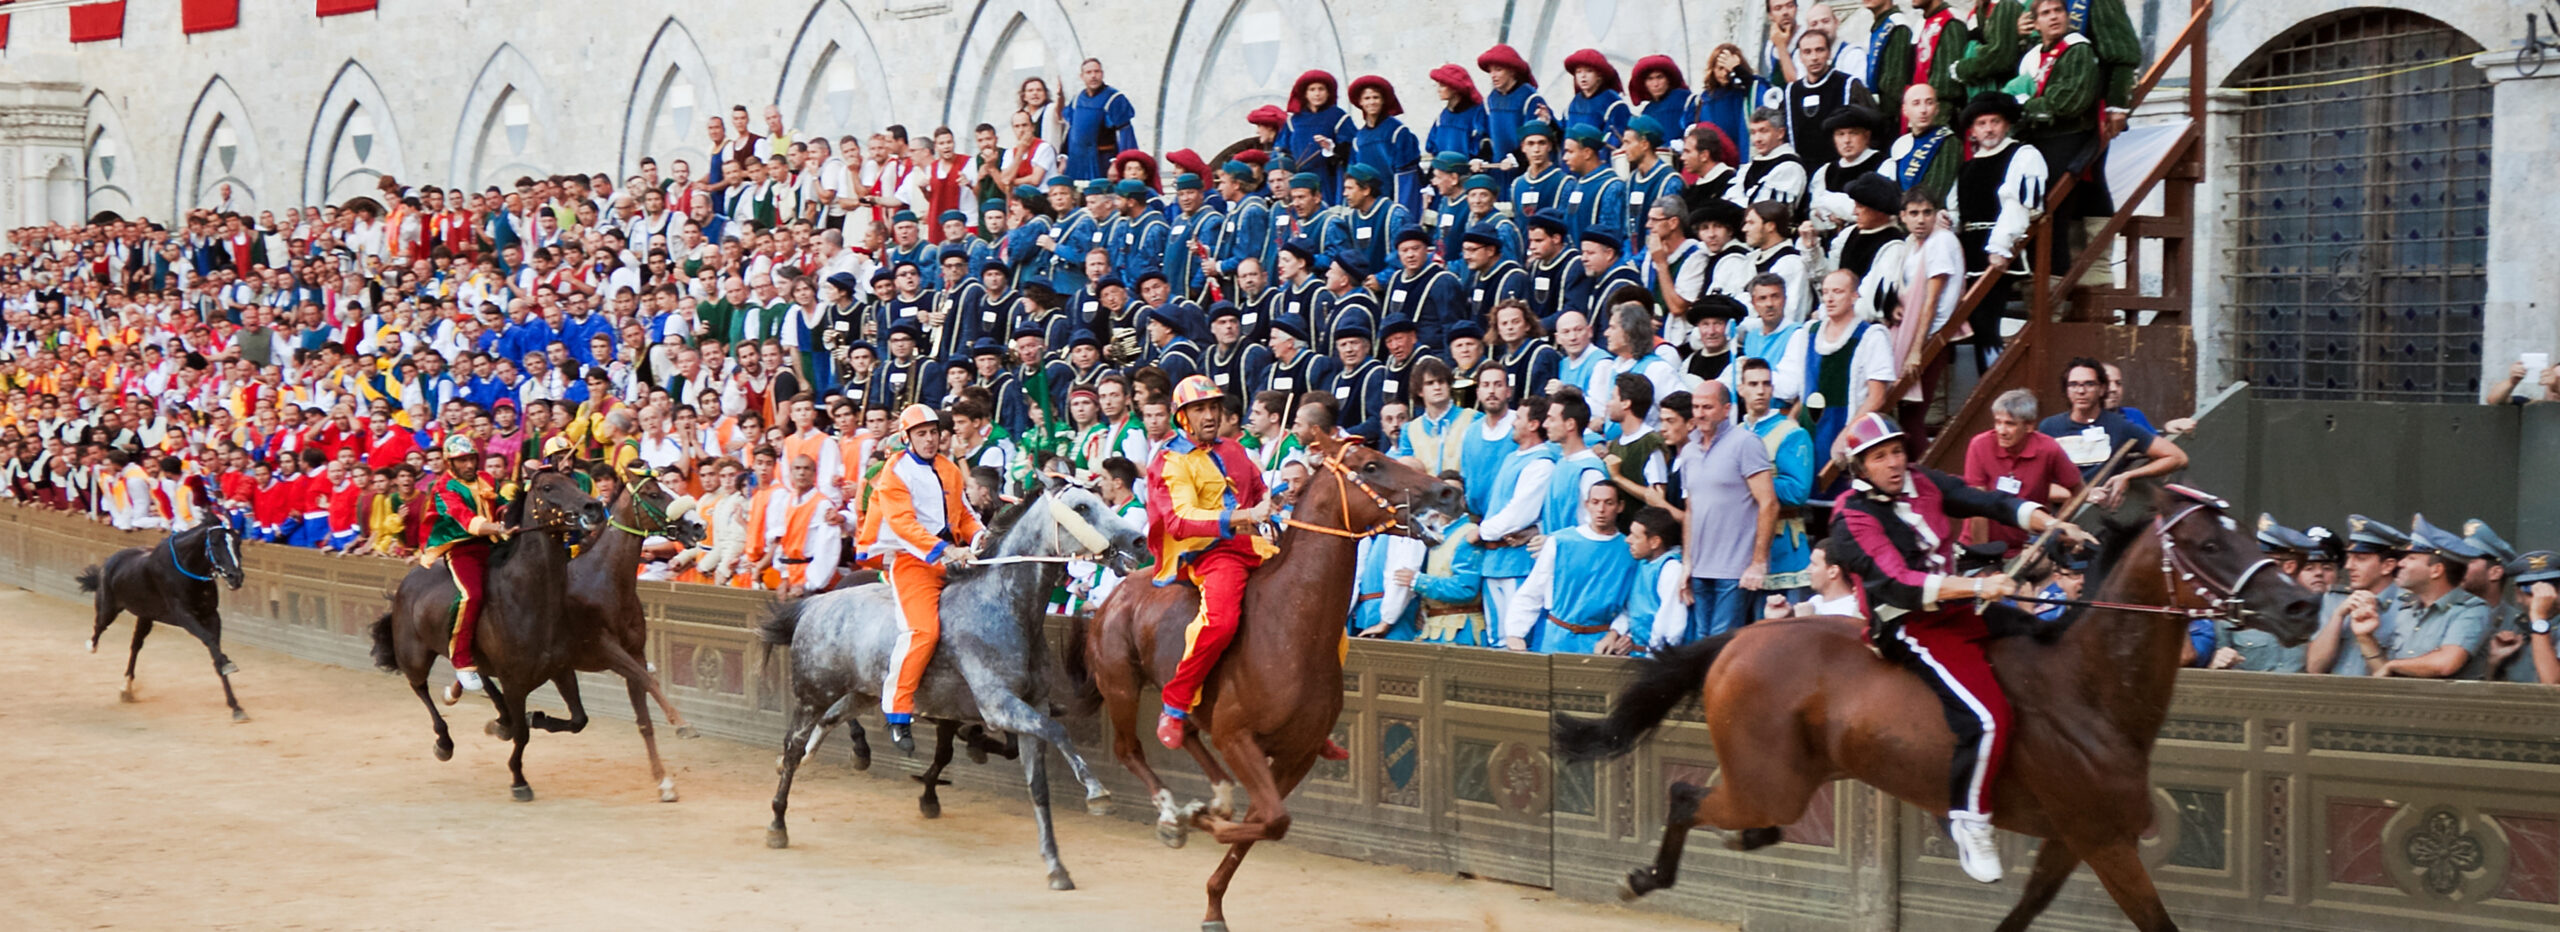 Palio di Siena: The World’s Oldest Horse Race